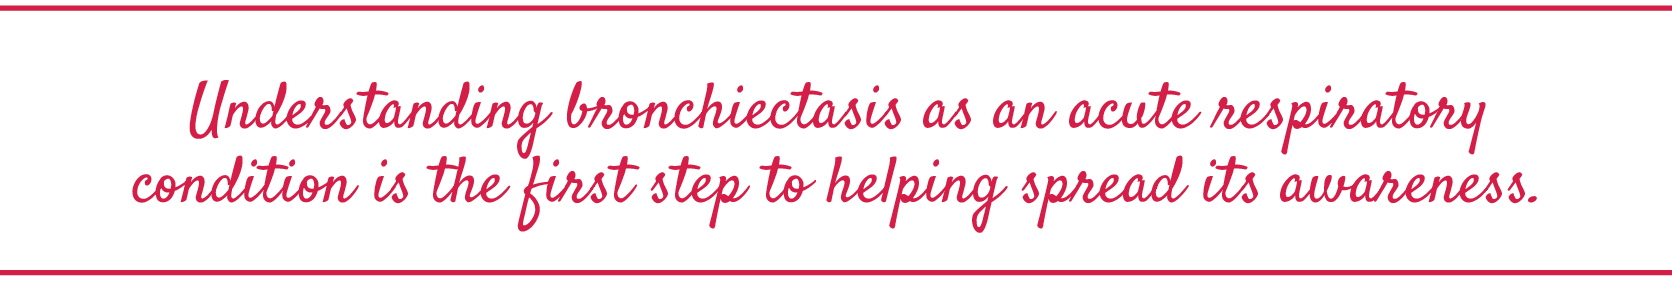 Understanding bronchiectasis as an acute respiratory condition is the first step to helping spread its awareness